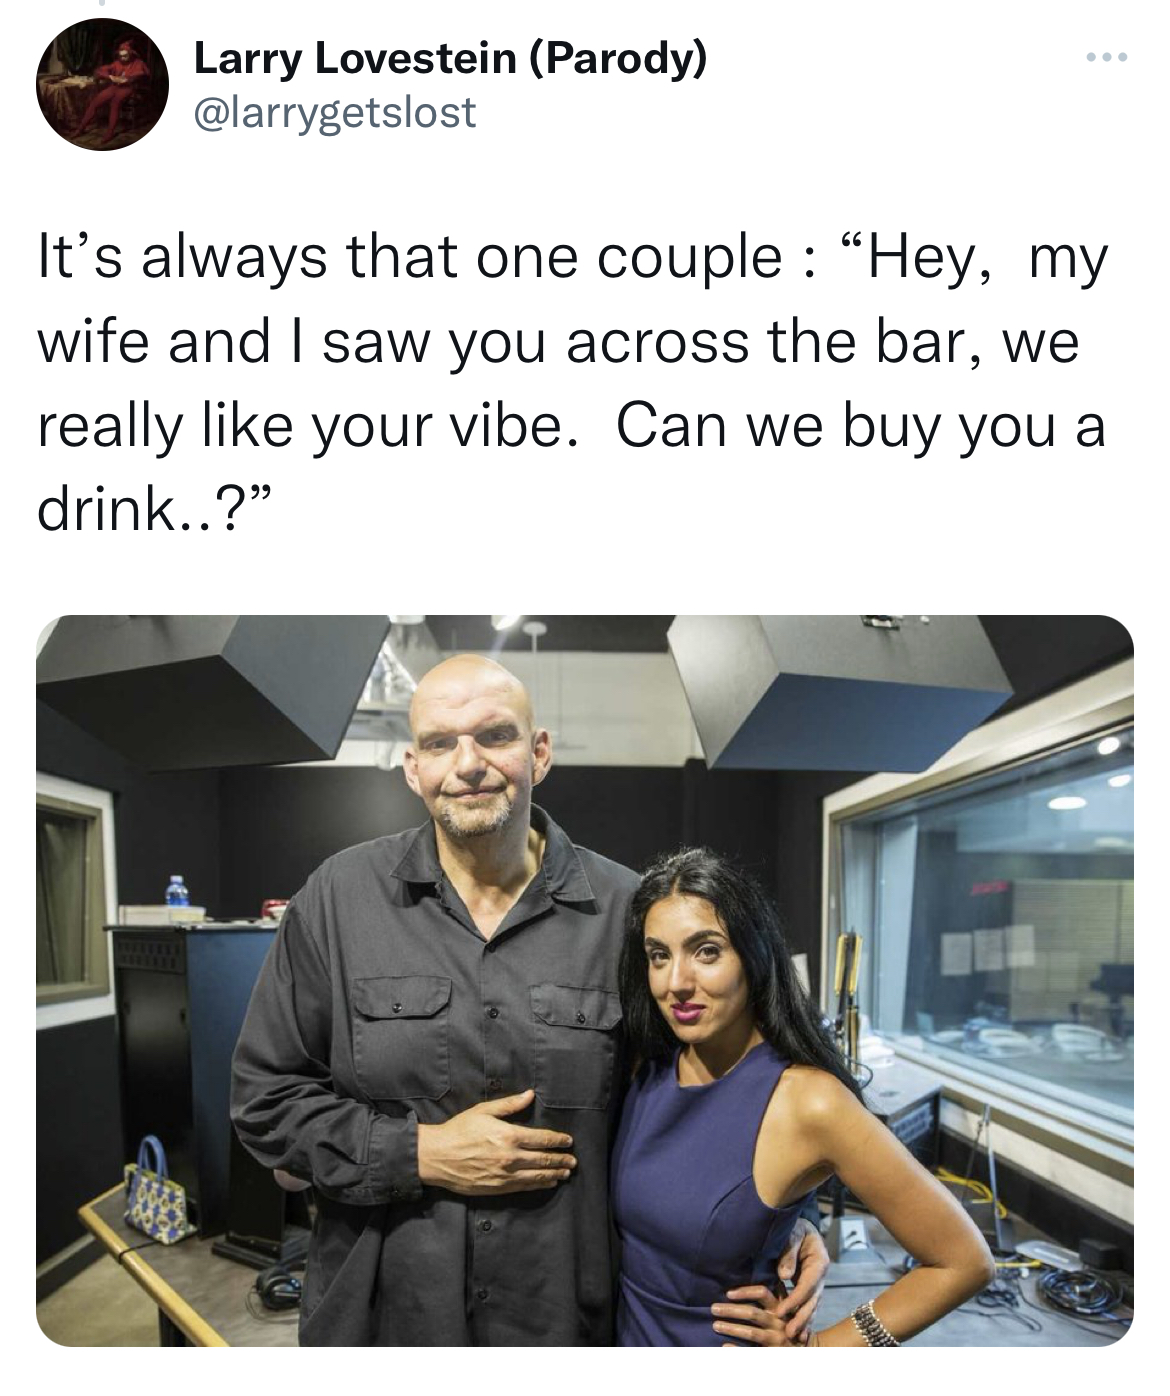 swinger memes across the bar - lt governor fetterman - Larry Lovetein Parody www It's always that one couple "Hey, my wife and I saw you across the bar, we really your vibe. Can we buy you a drink..?"